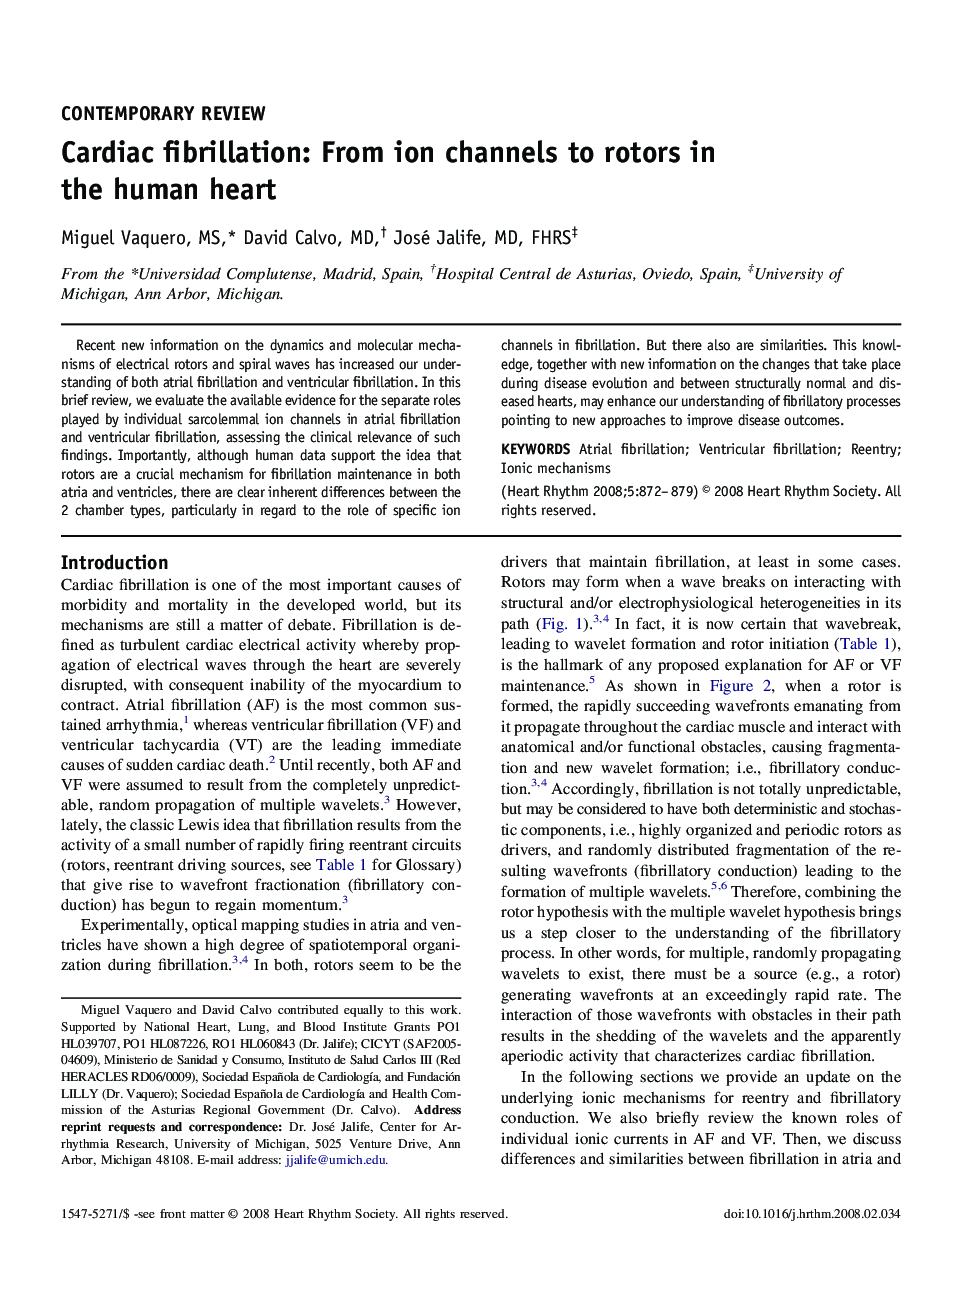 Cardiac fibrillation: From ion channels to rotors in the human heart 